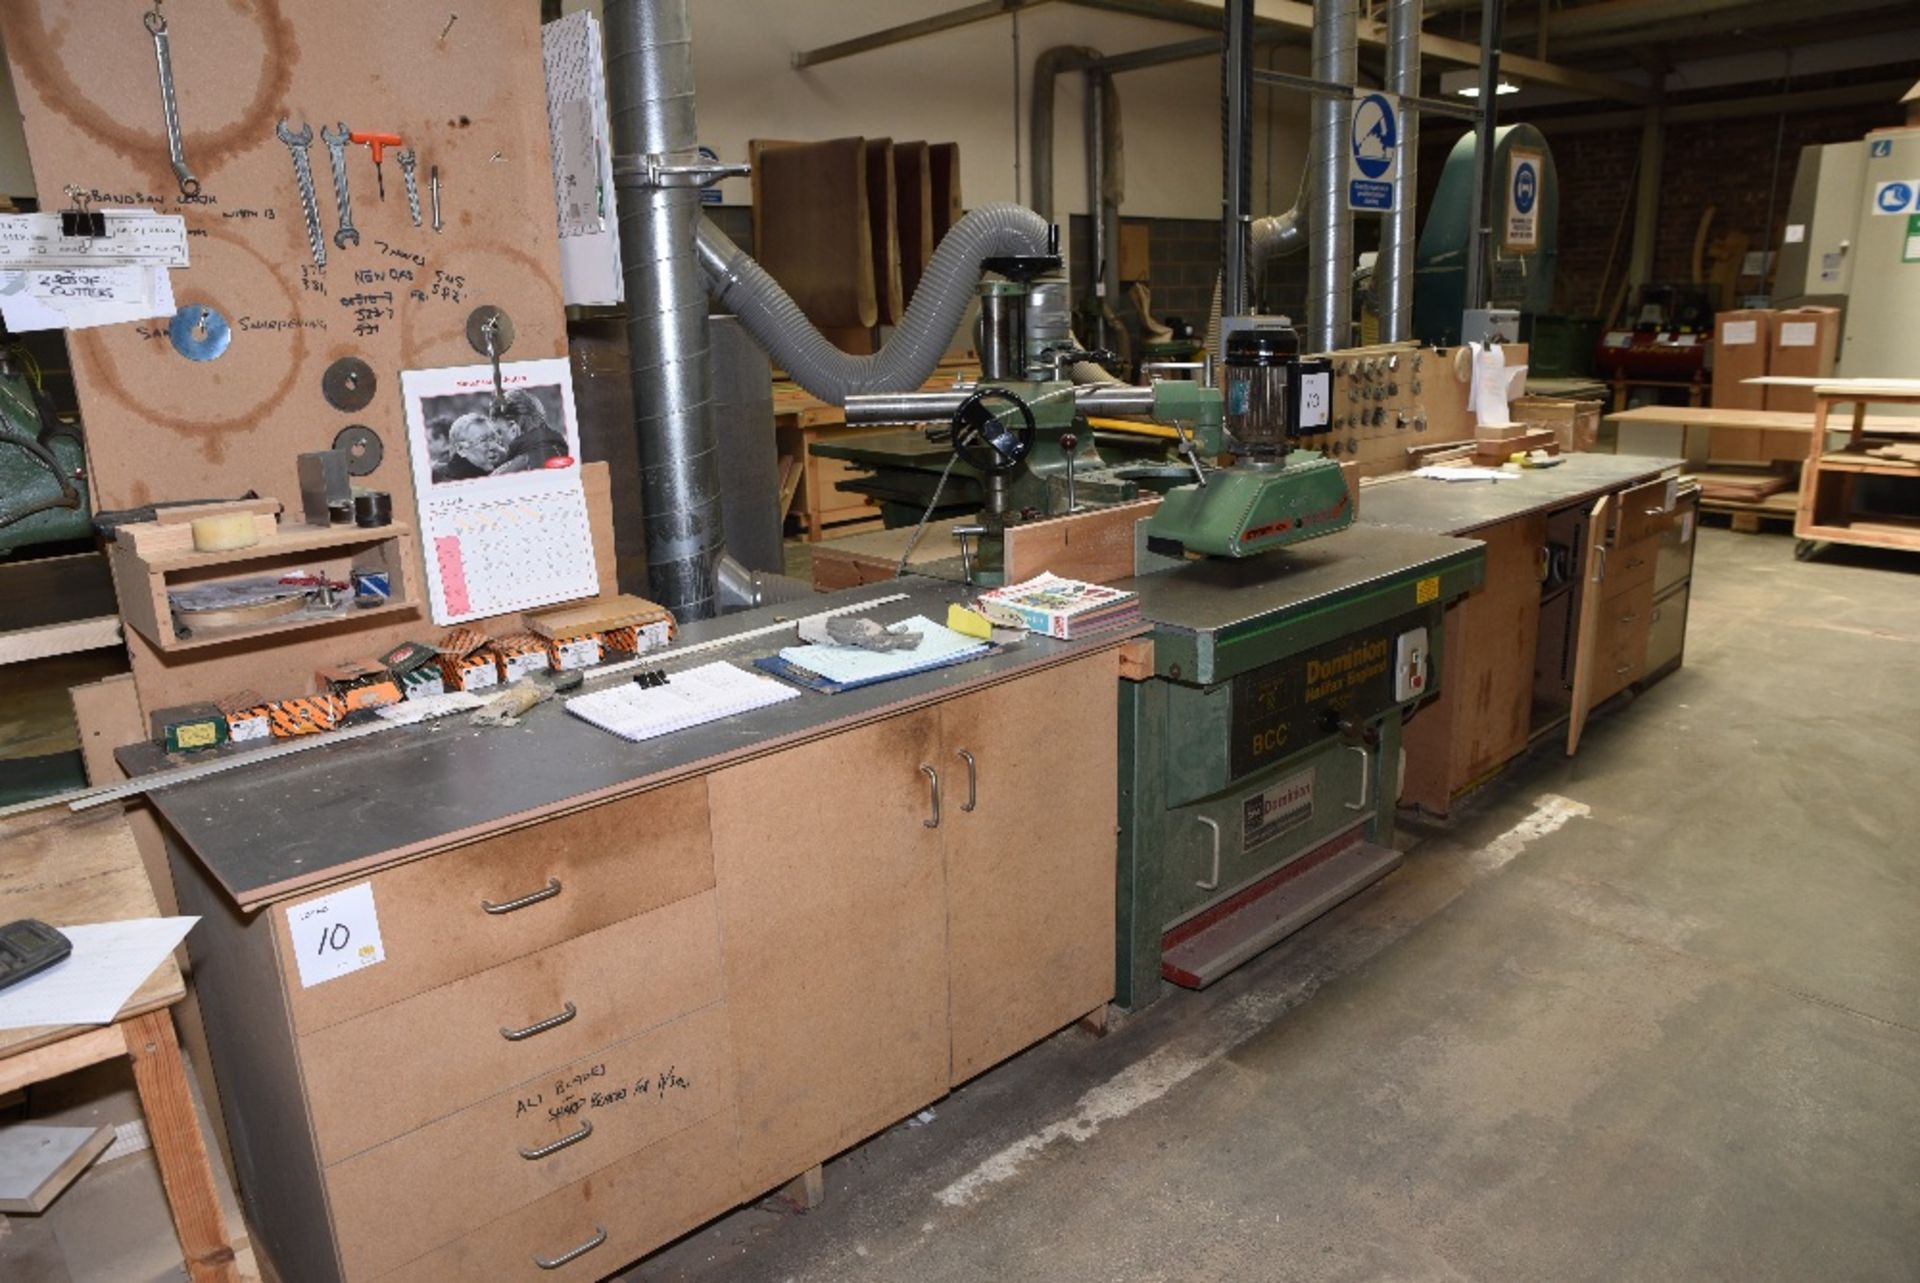 Dominion BCC spindle moulder
S/N: B739768
c/w Maggi Steff 2034 power feed & quantity of tooling - Image 3 of 3